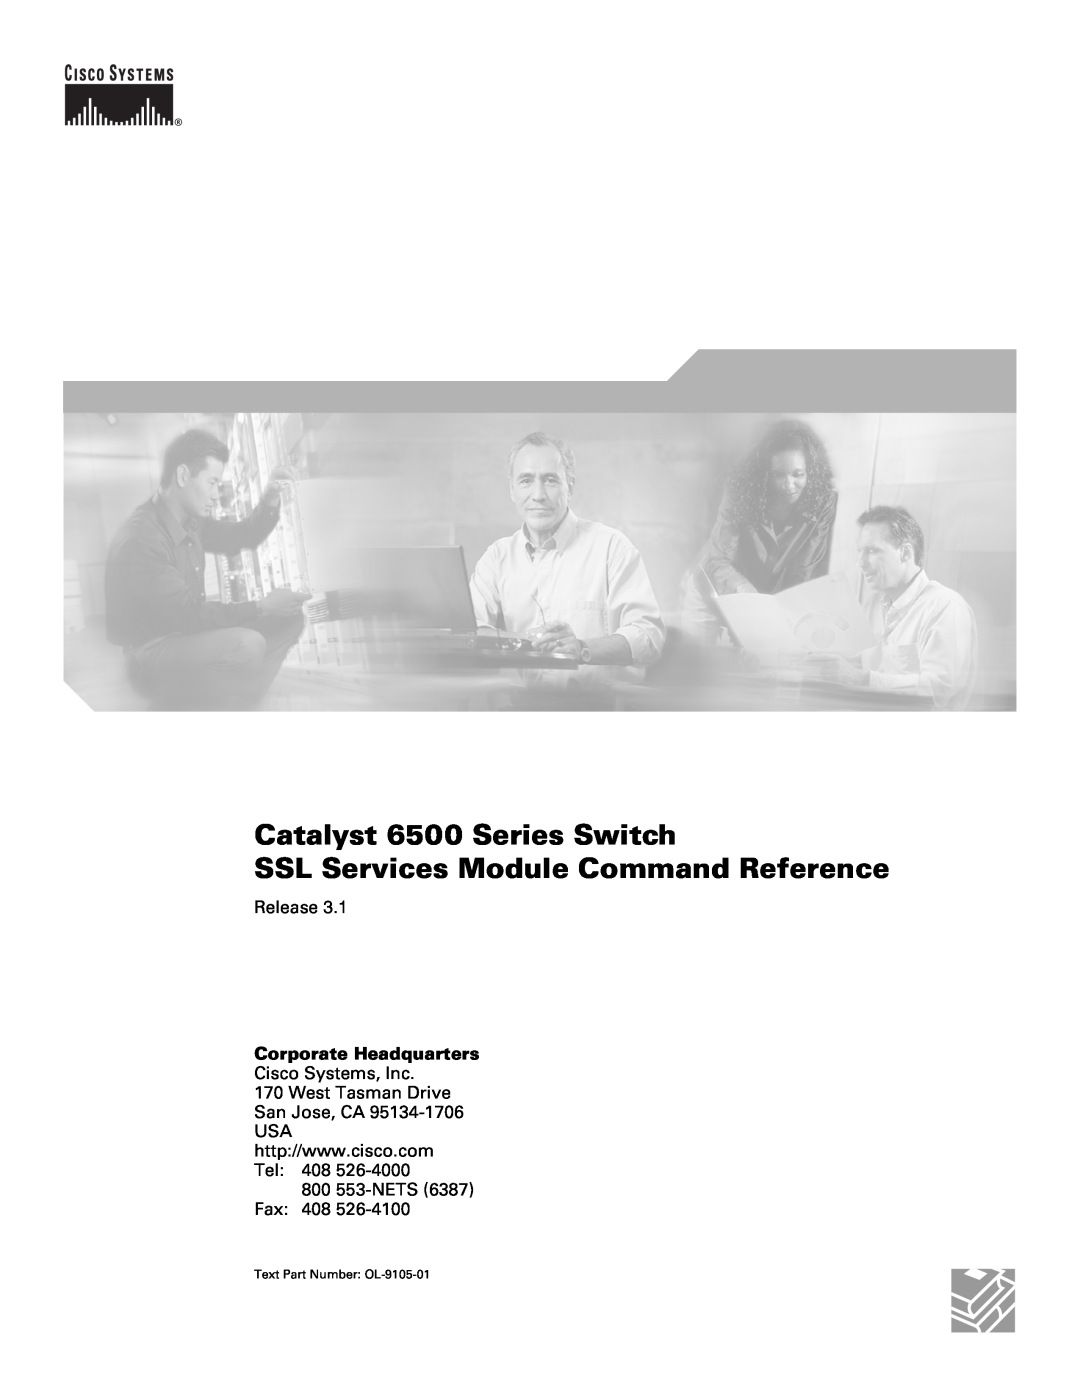 Cisco Systems manual Corporate Headquarters, Catalyst 6500 Series Switch SSL Services Module Command Reference, Release 